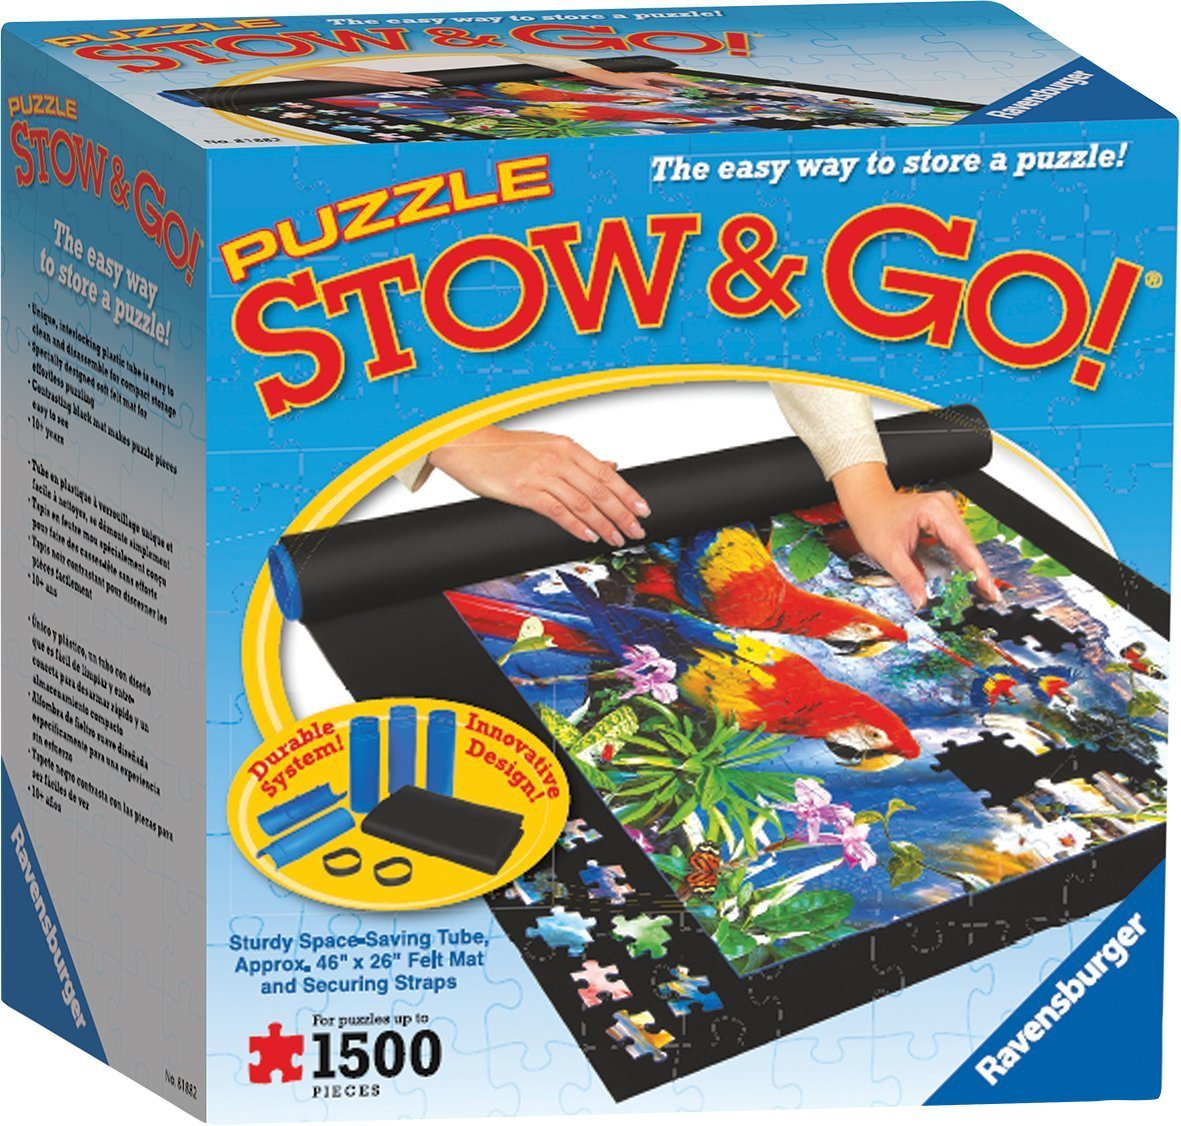 Ravensburger 'Stow & Go' Puzzle Roller